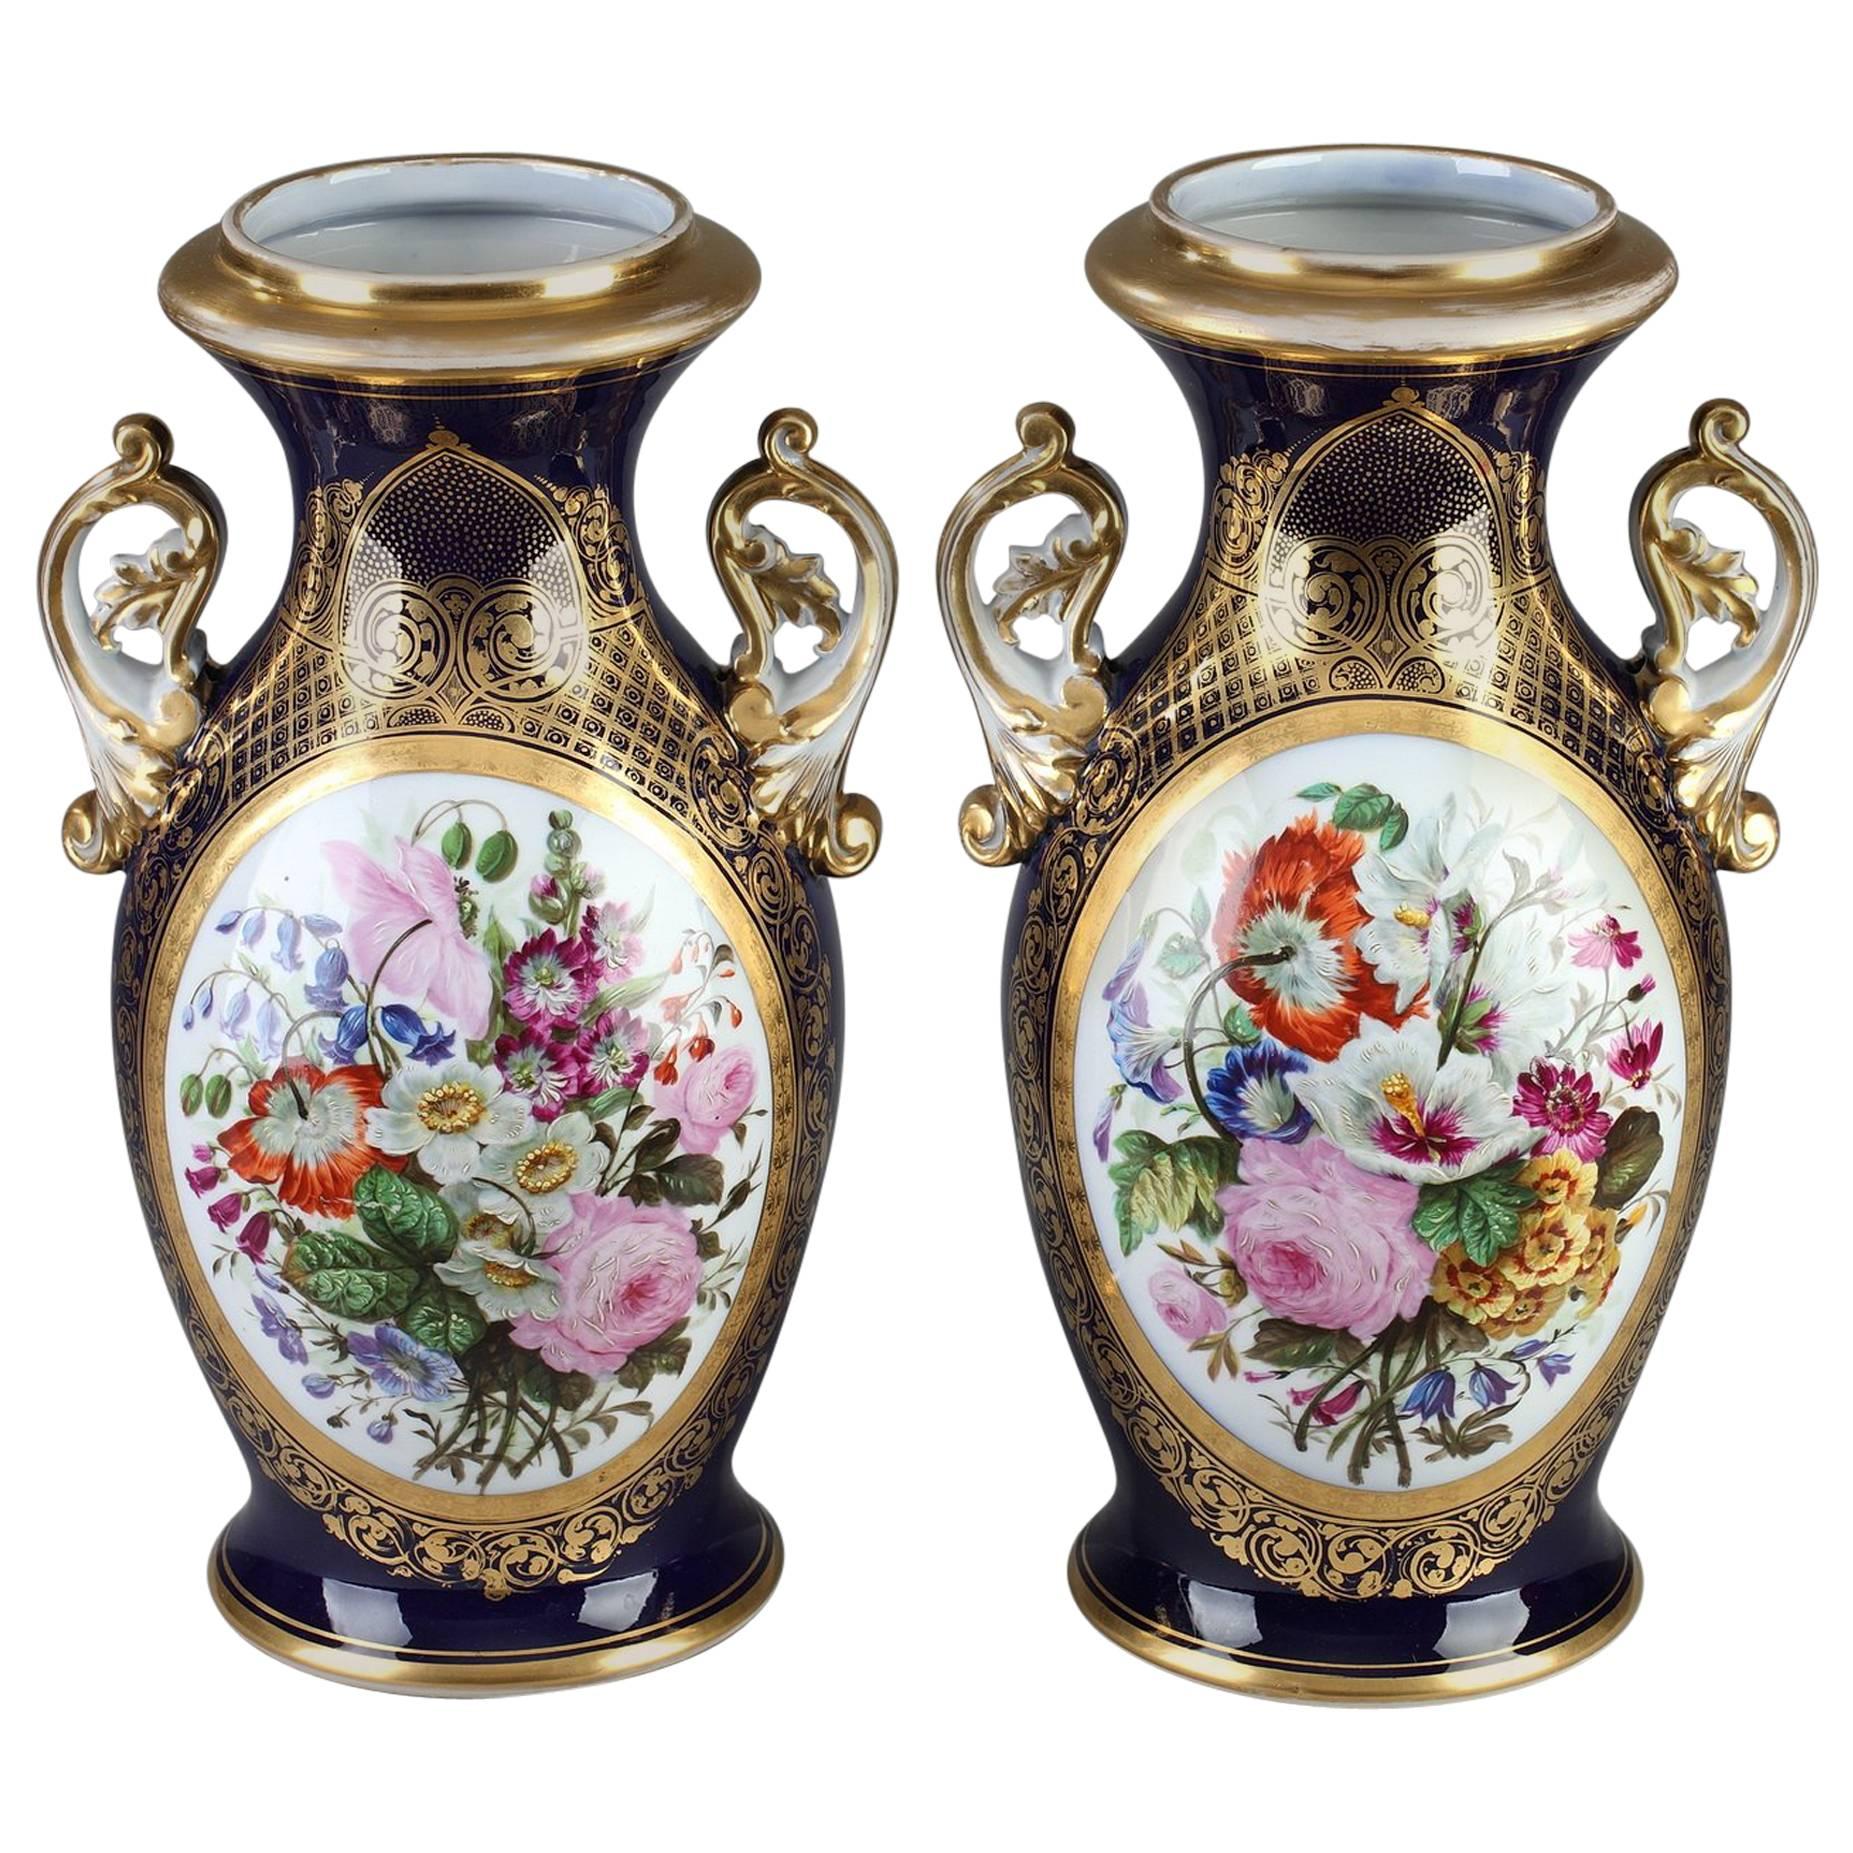 Pair of 19th Century Bayeux Porcelain Vases